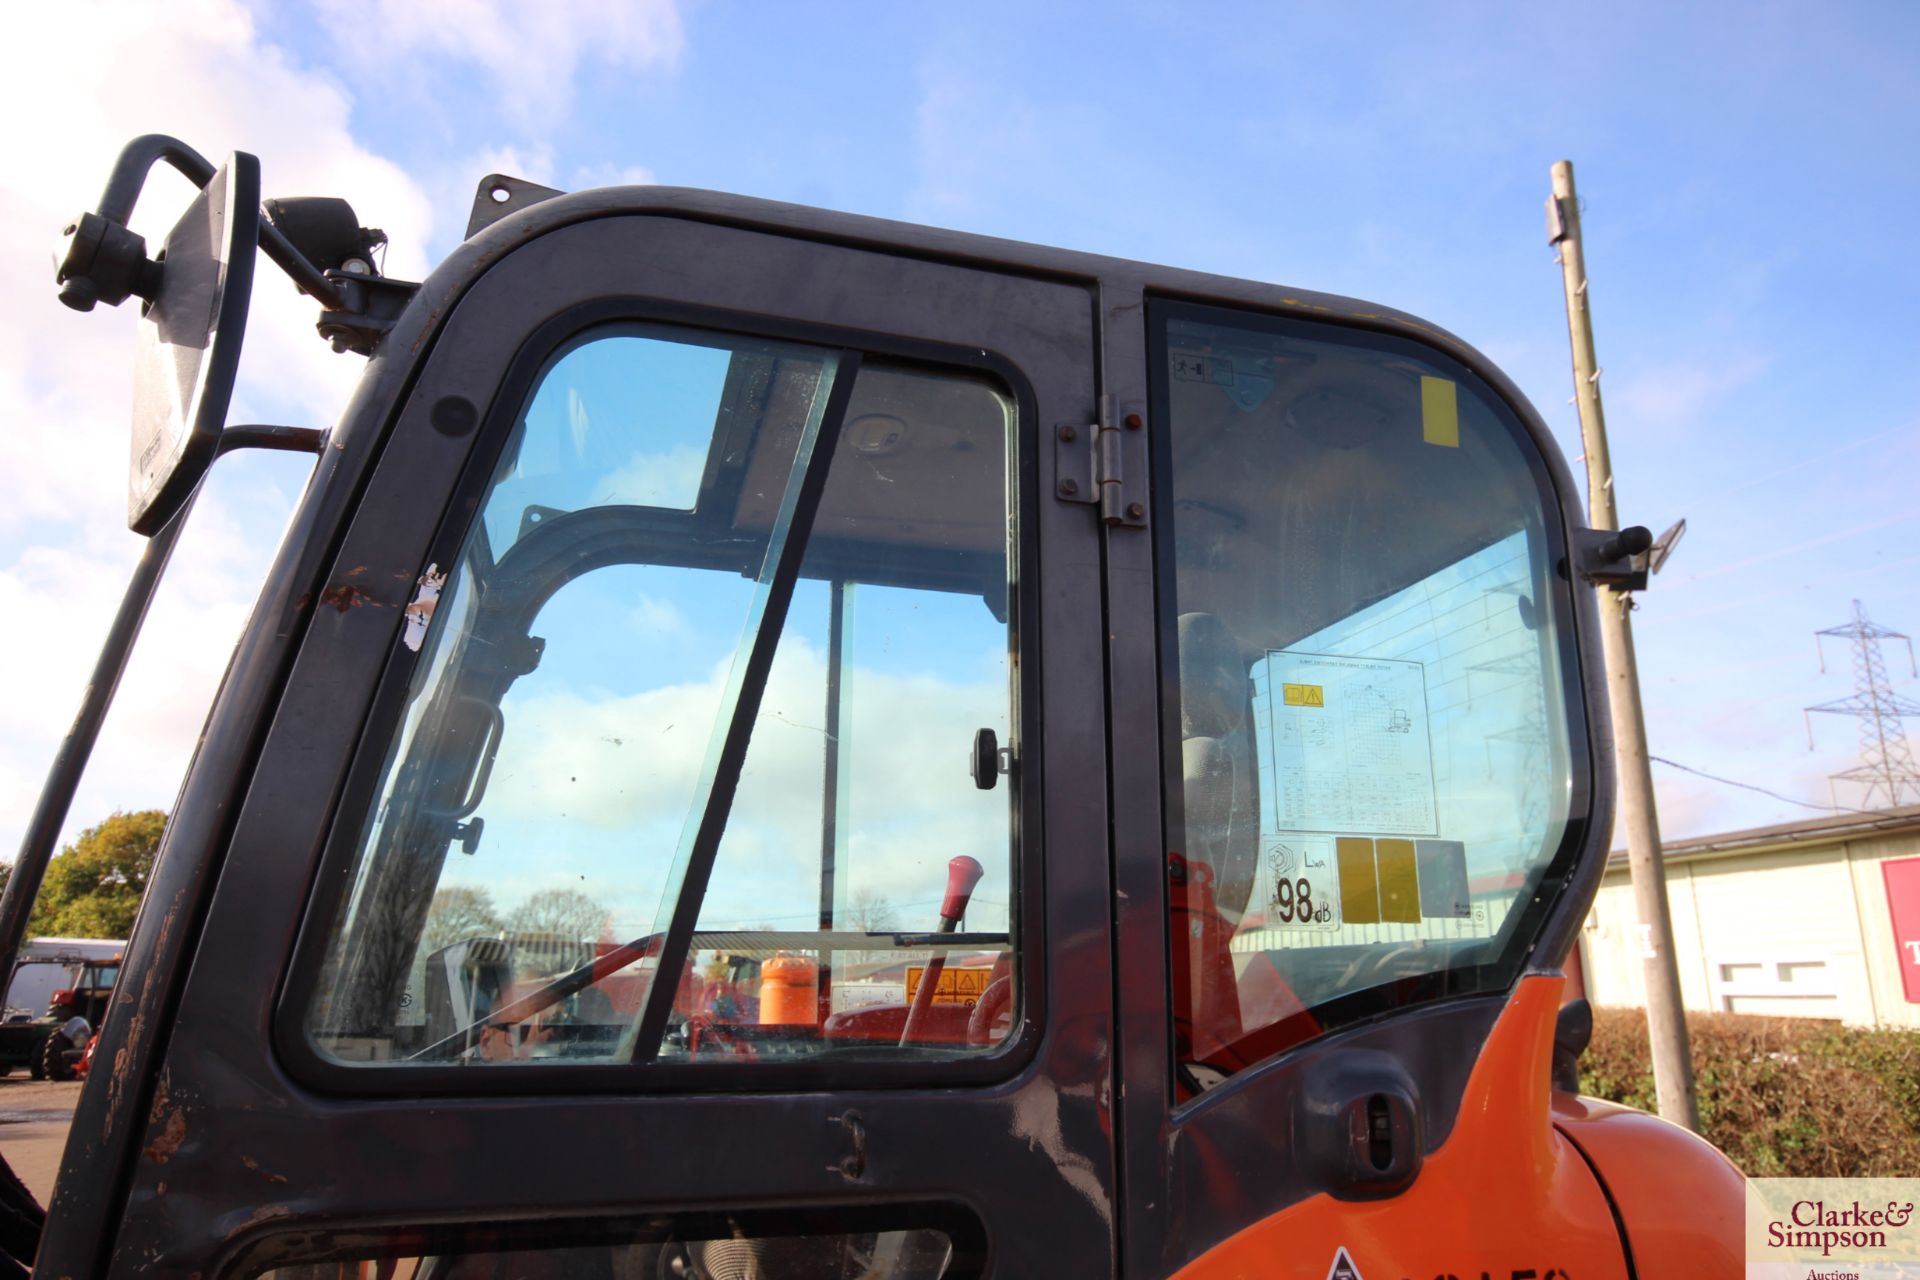 Doosan DX55E 5.5T excavator. 2011. 5,045 hours. Serial number 50461. With new rubber tracks 50 hours - Image 21 of 68